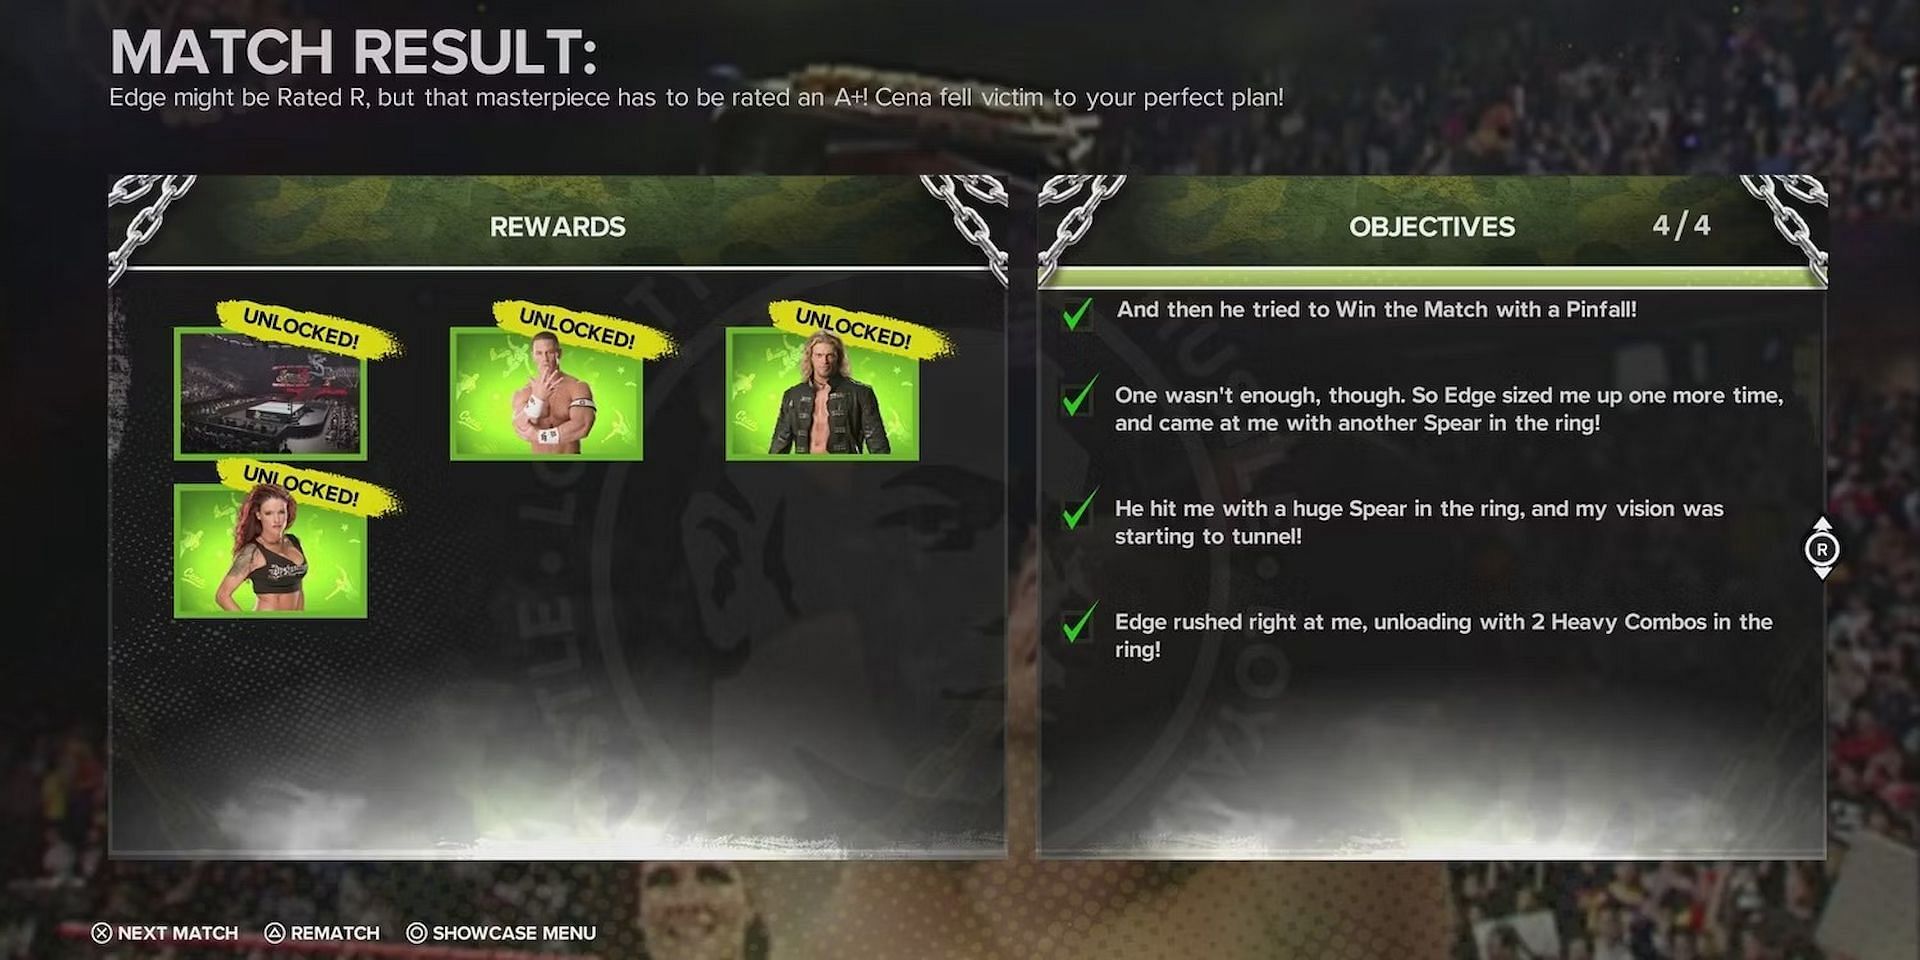 You must complete four objectives to defeat John Cena (Image via 2K Sports)